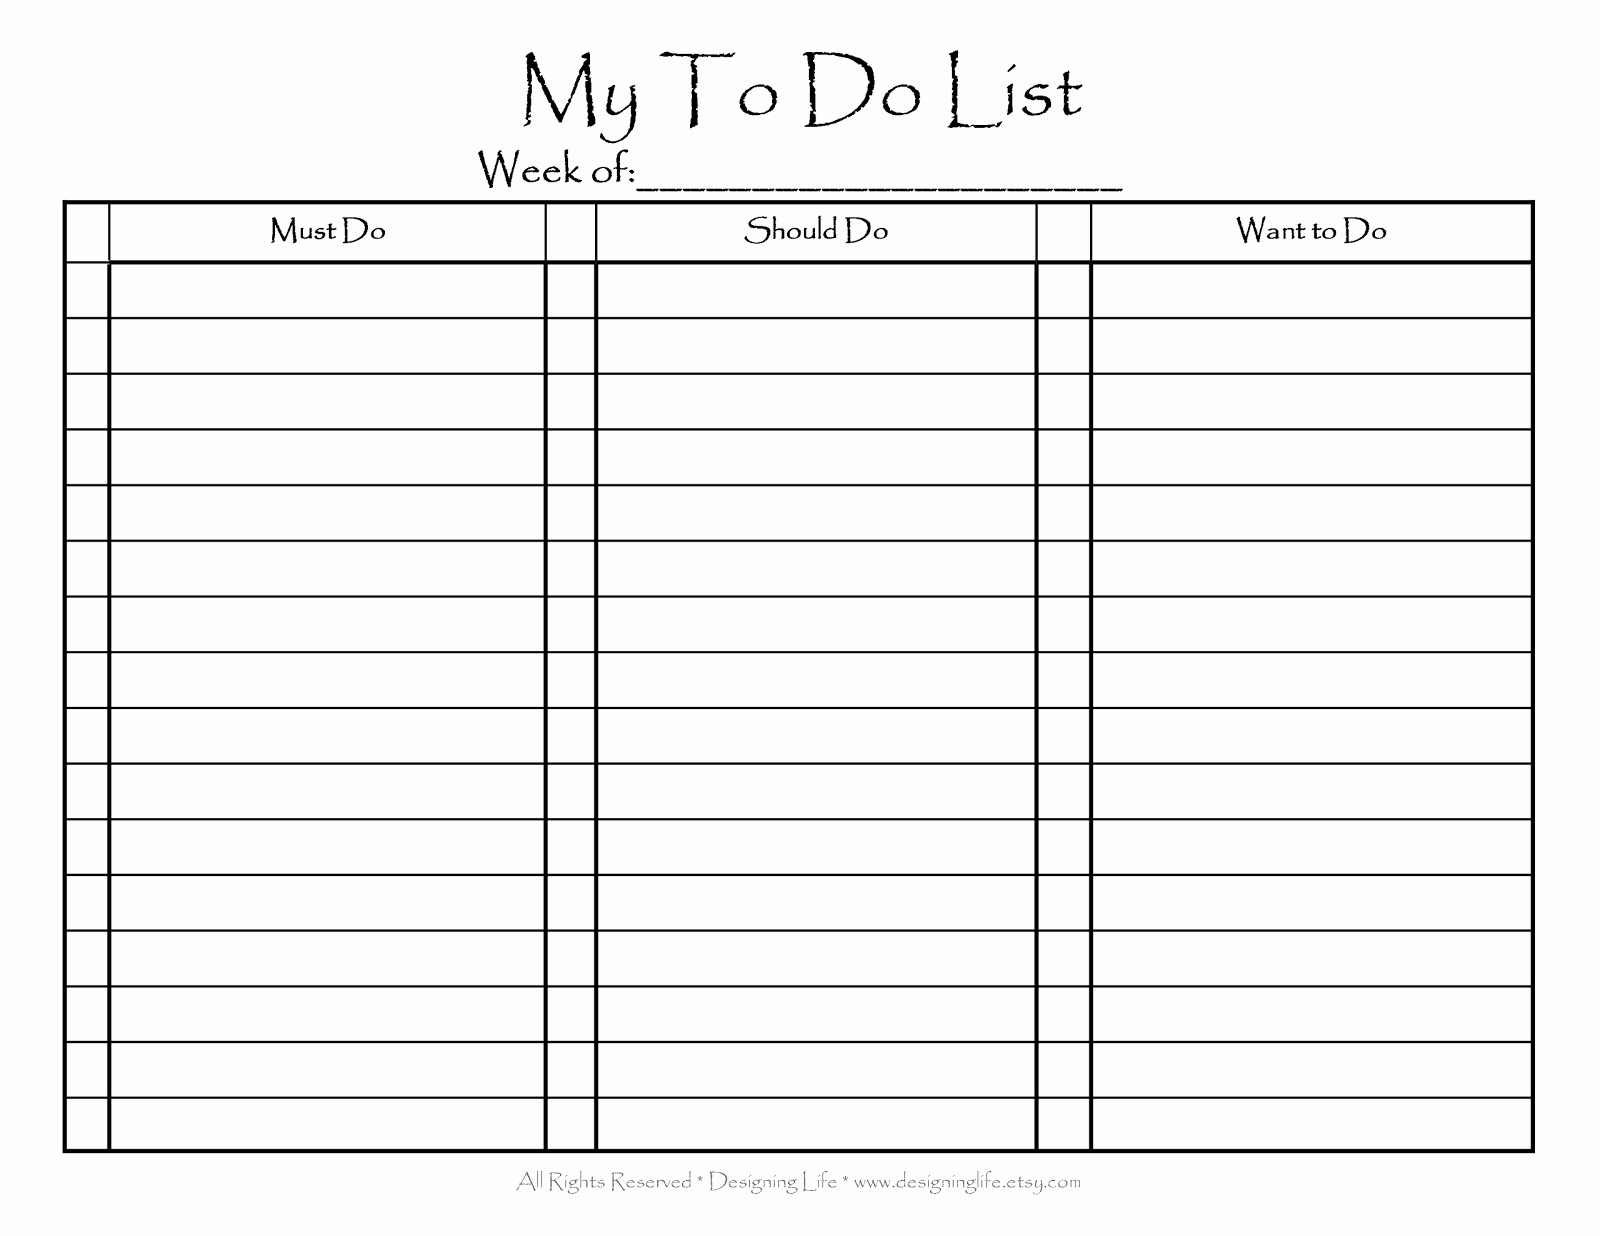 Things to Do List Template New Designing Life December 2012